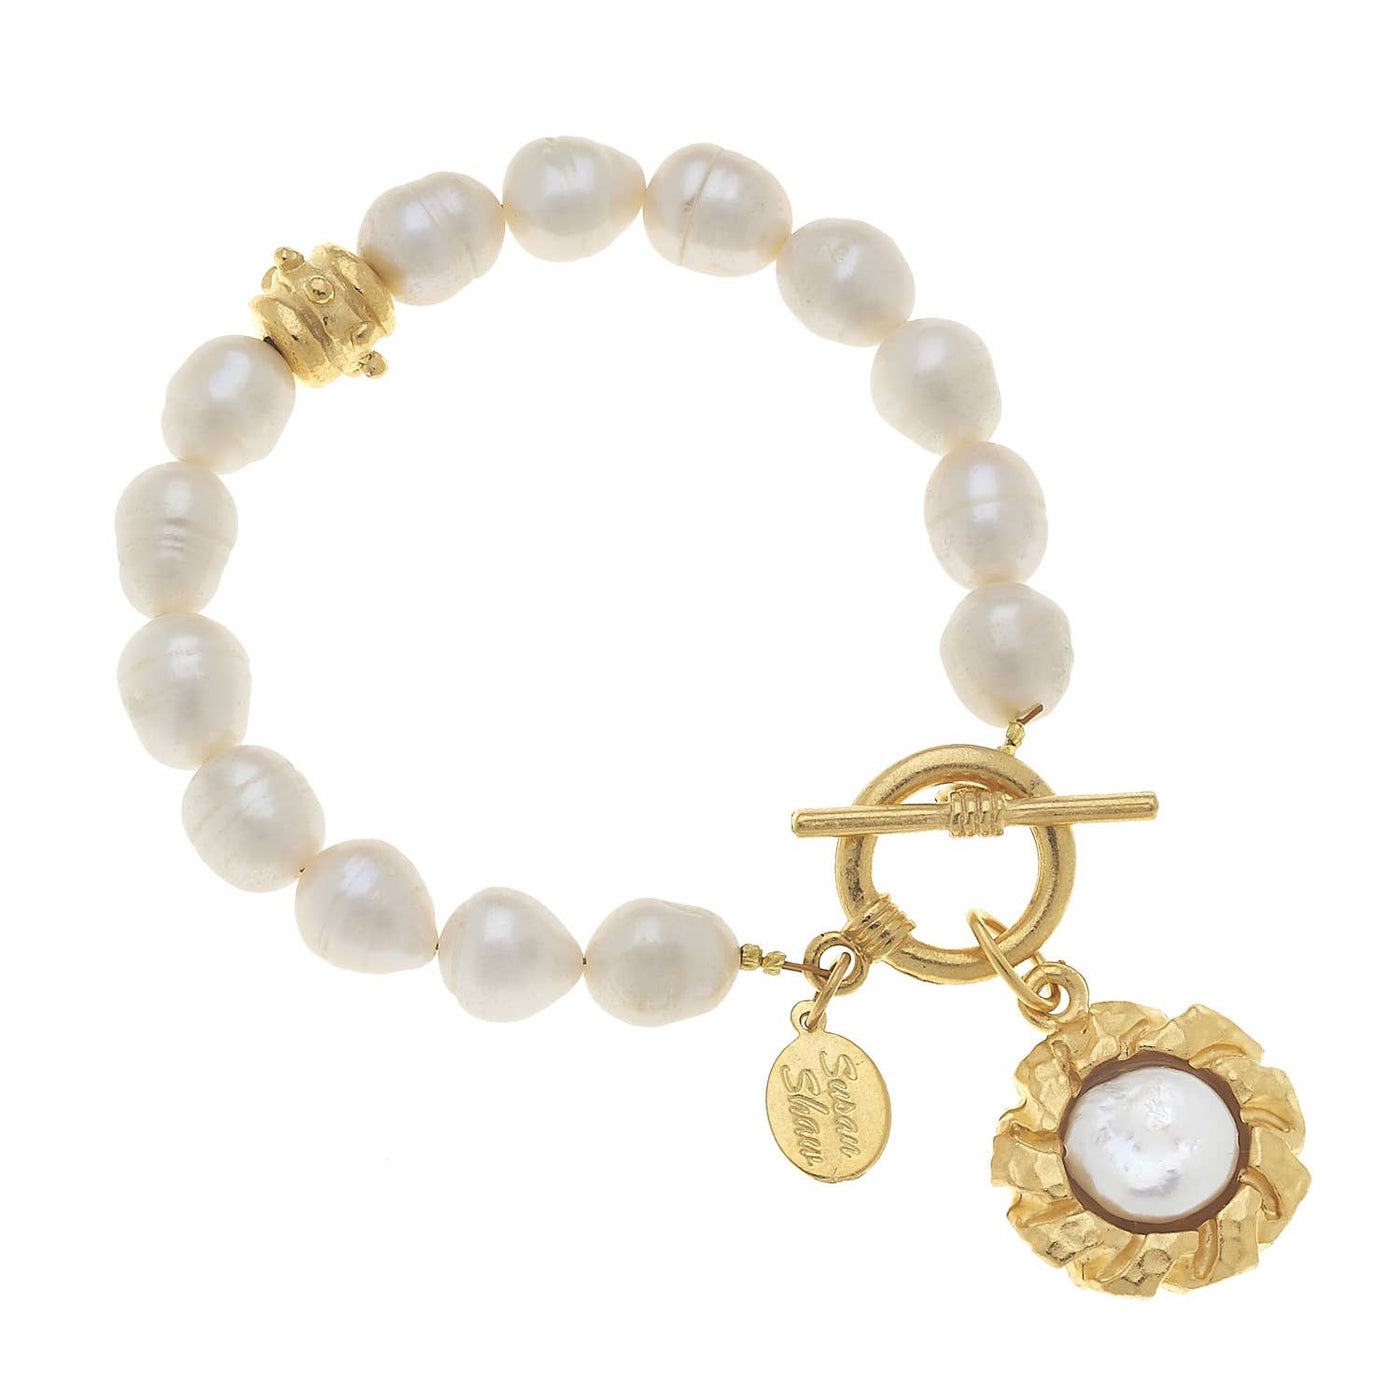 Susan Shaw - Genuine Freshwater Pearl Bracelet with Gold Cab and Genuine Coin Pearl Charm